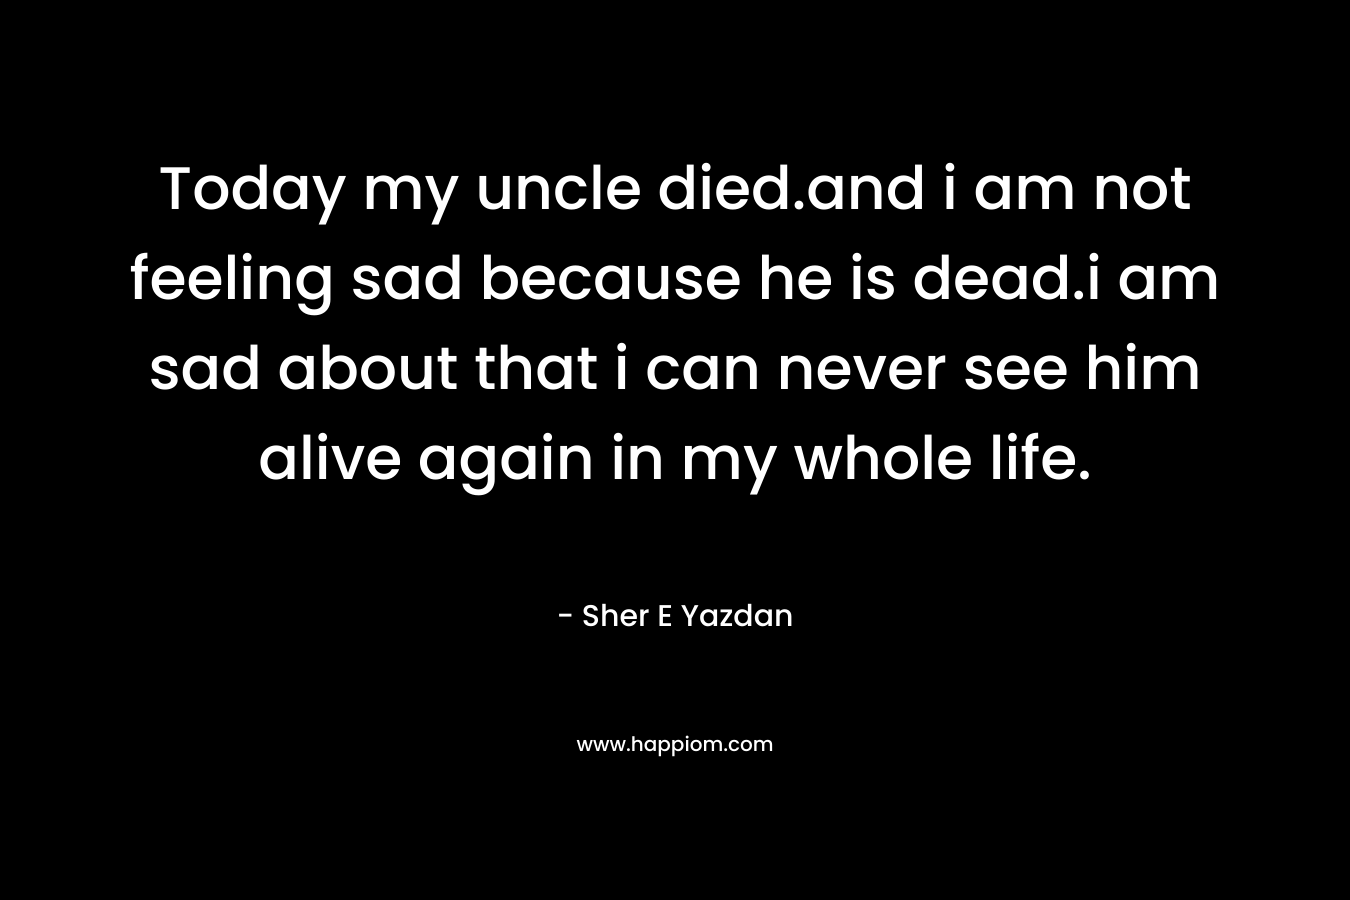 Today my uncle died.and i am not feeling sad because he is dead.i am sad about that i can never see him alive again in my whole life.